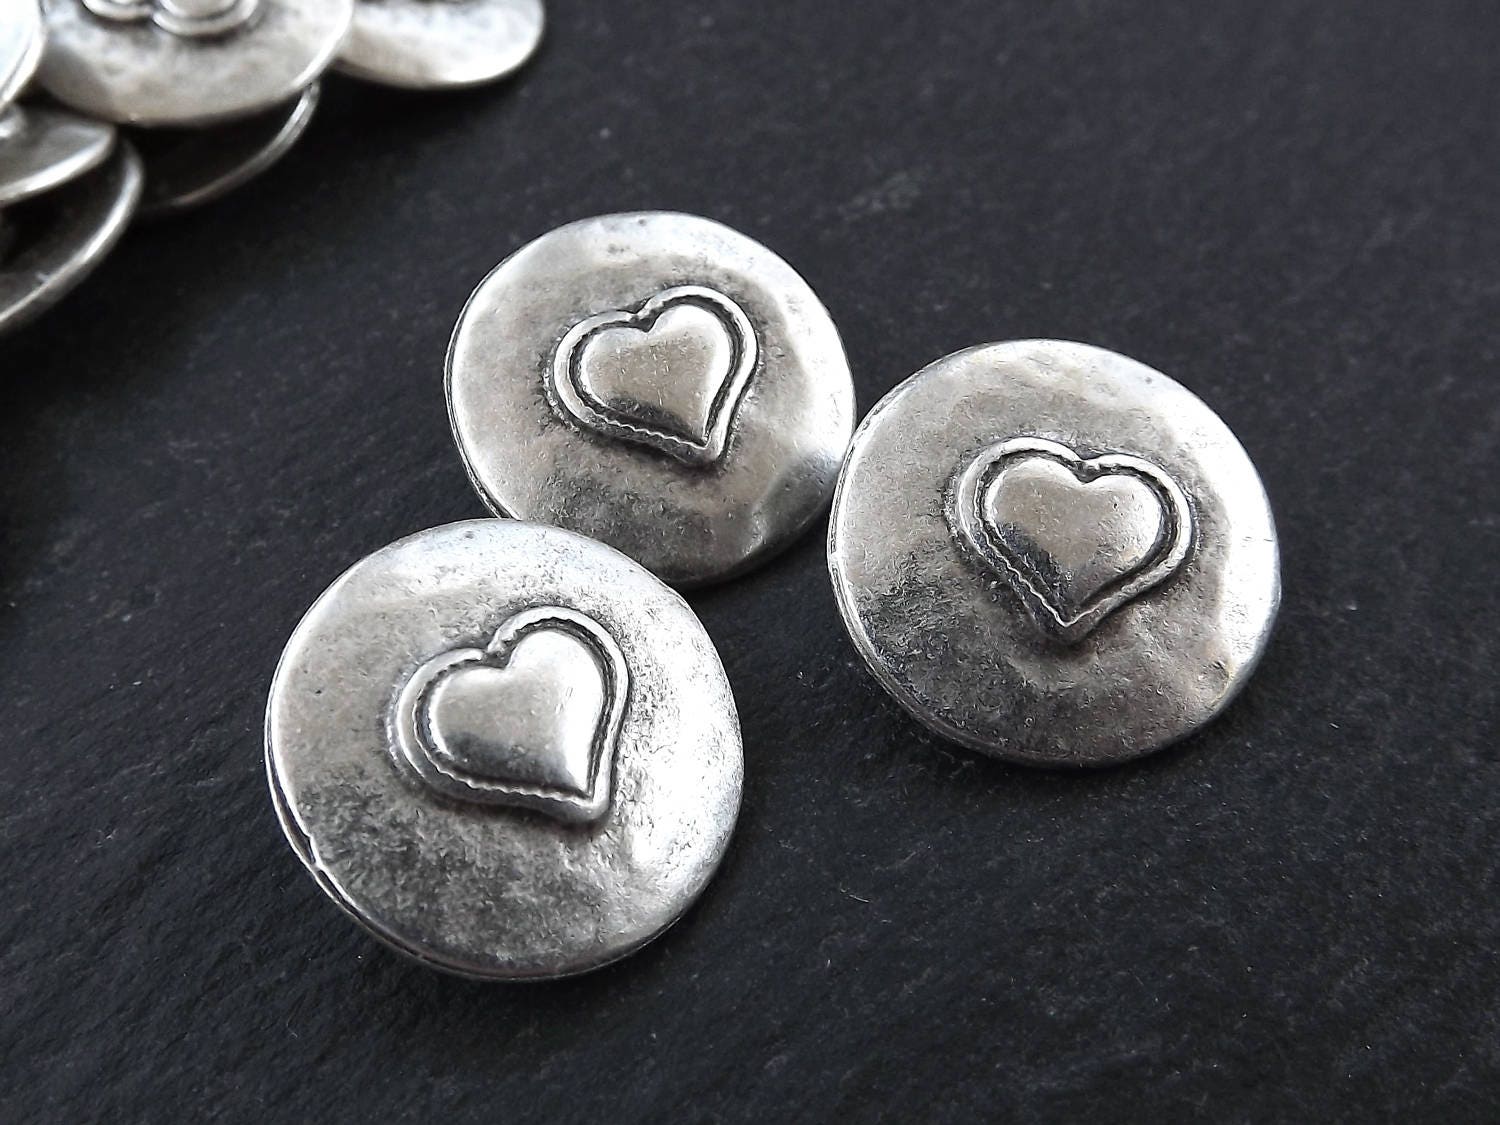 3 Rustic Metal Heart Buttons Antique Bronze Plated - Round Silver Buttons,  Metal Shank Button, Sewing Buttons, Jewelry Making Buttons